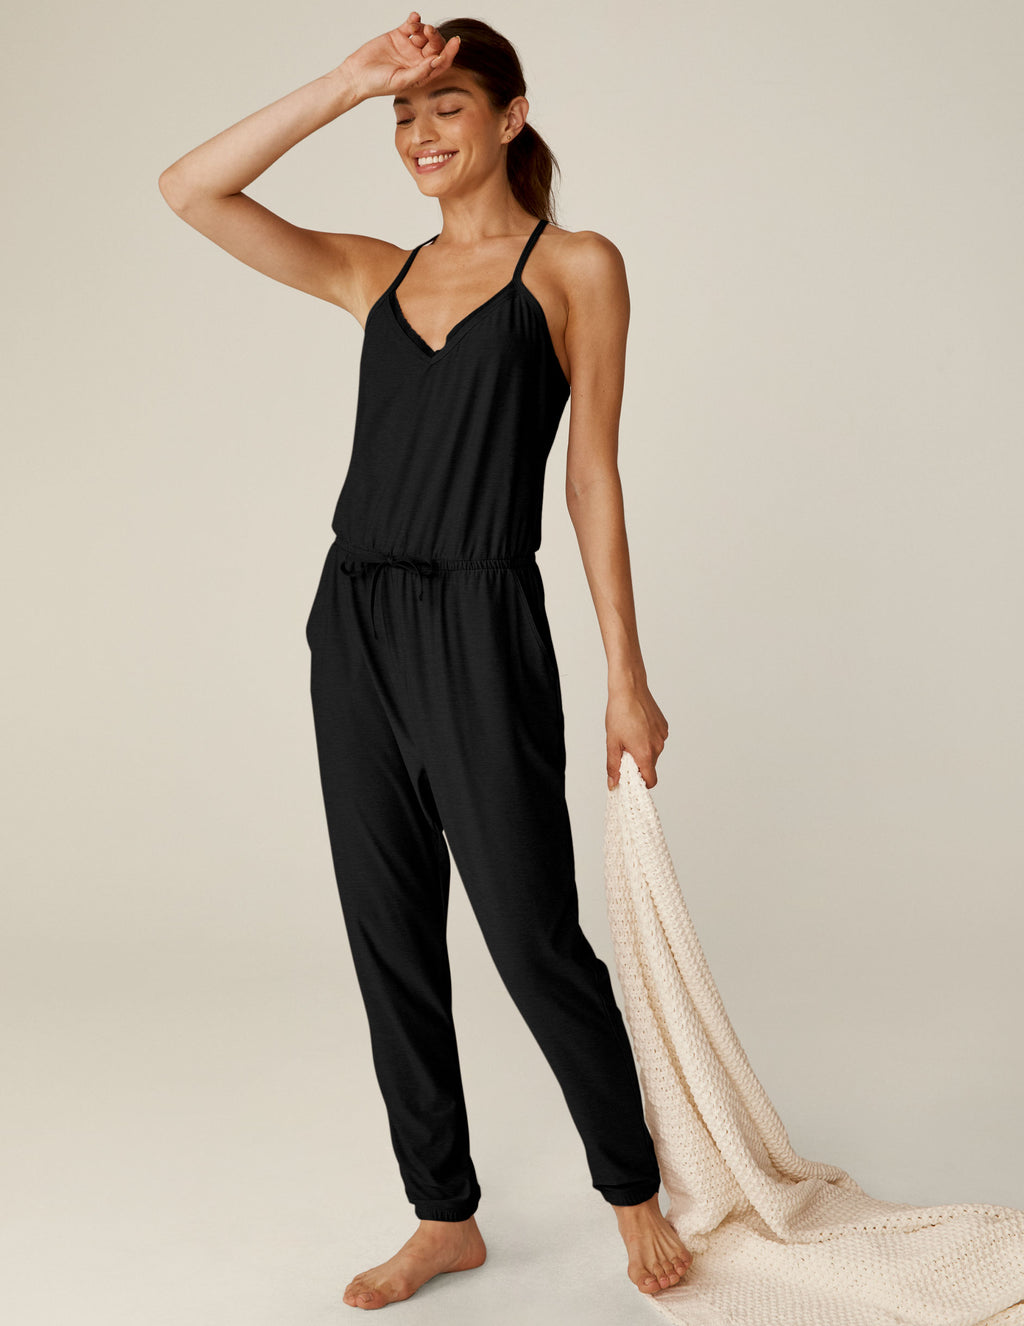 Featherweight Dream Lace Racerback Jumpsuit Featured Image